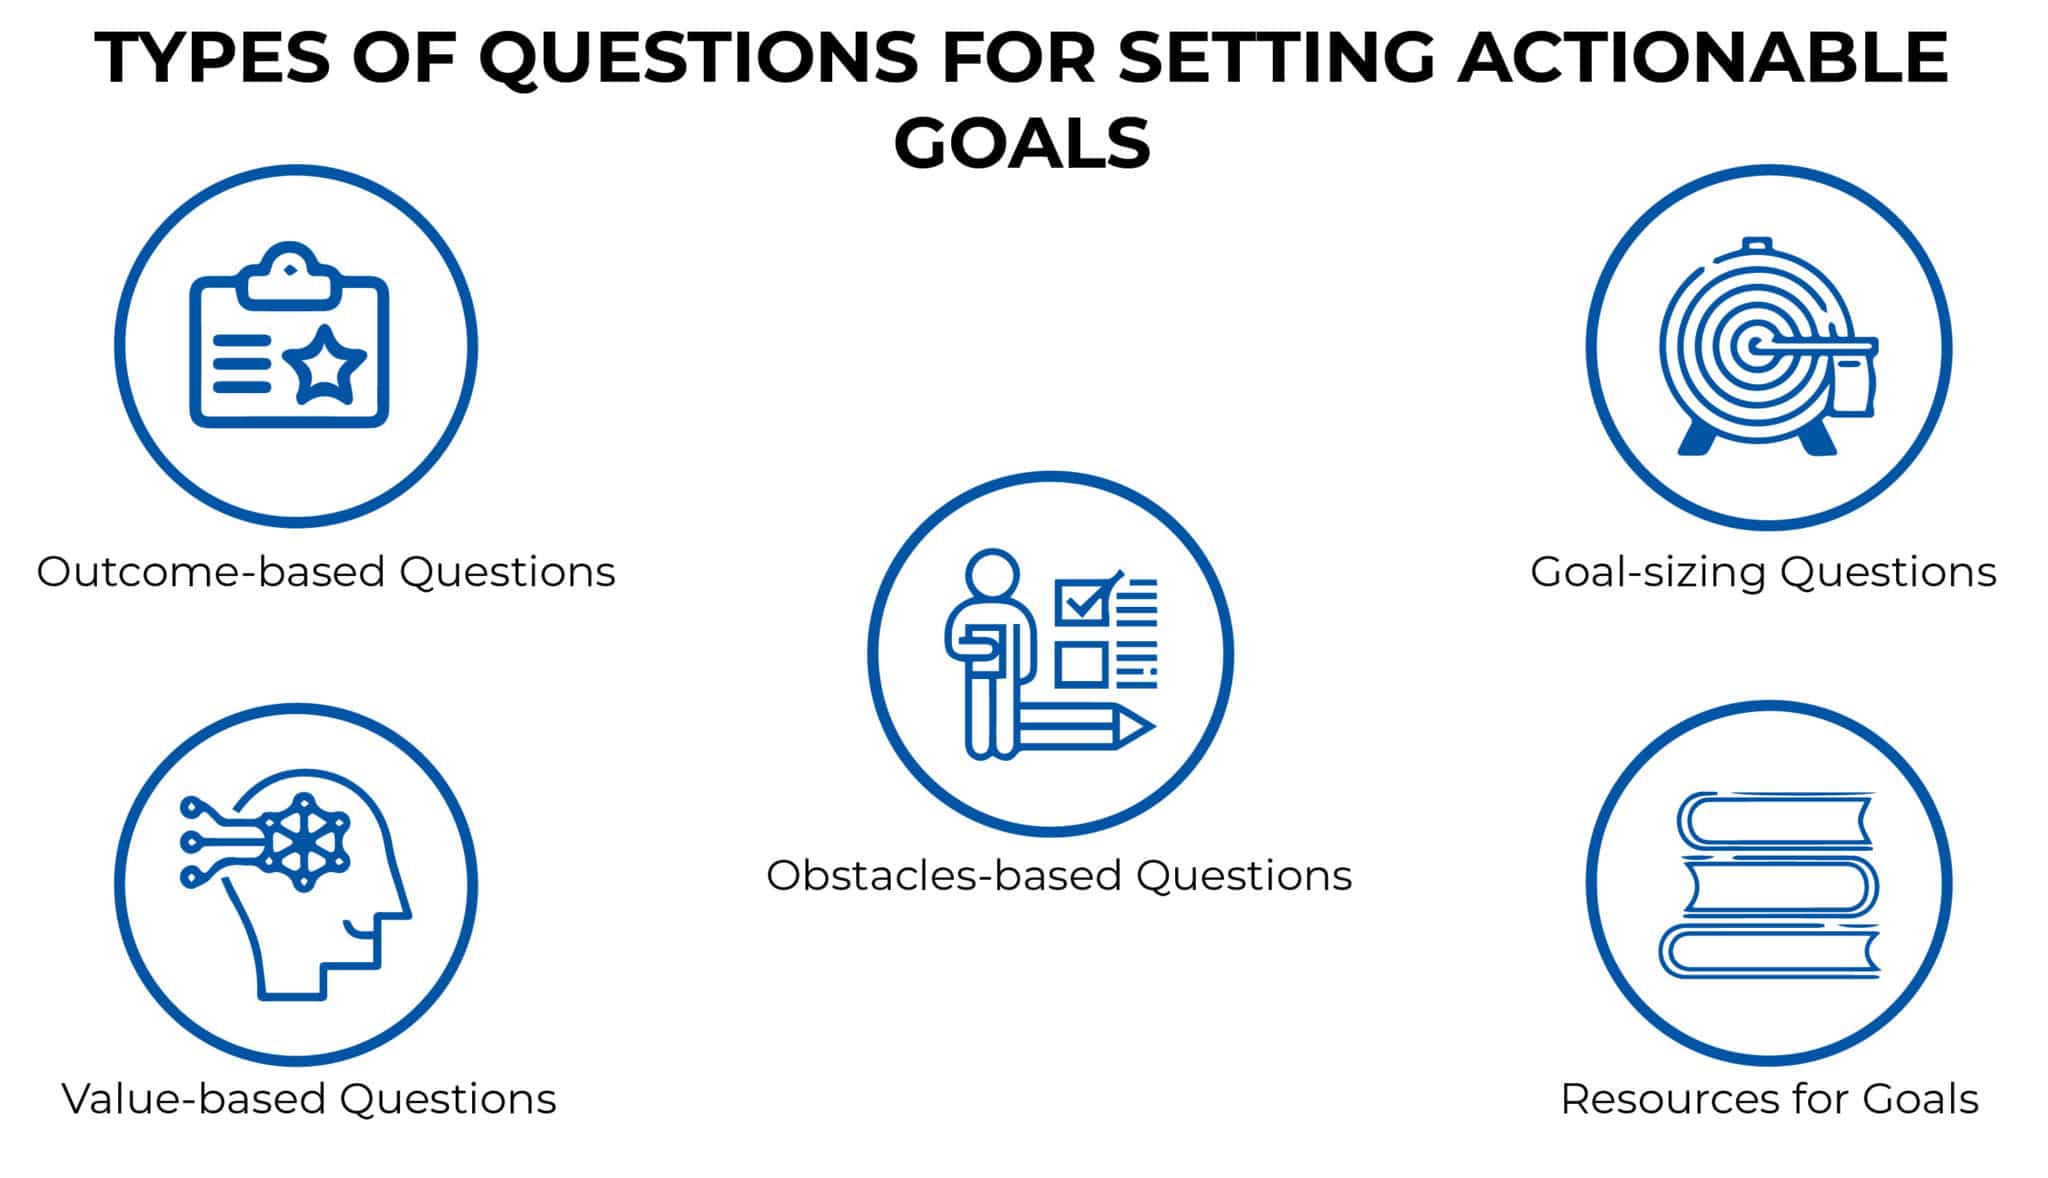 TYPES OF QUESTIONS FOR SETTING ACTIONABLE GOALS